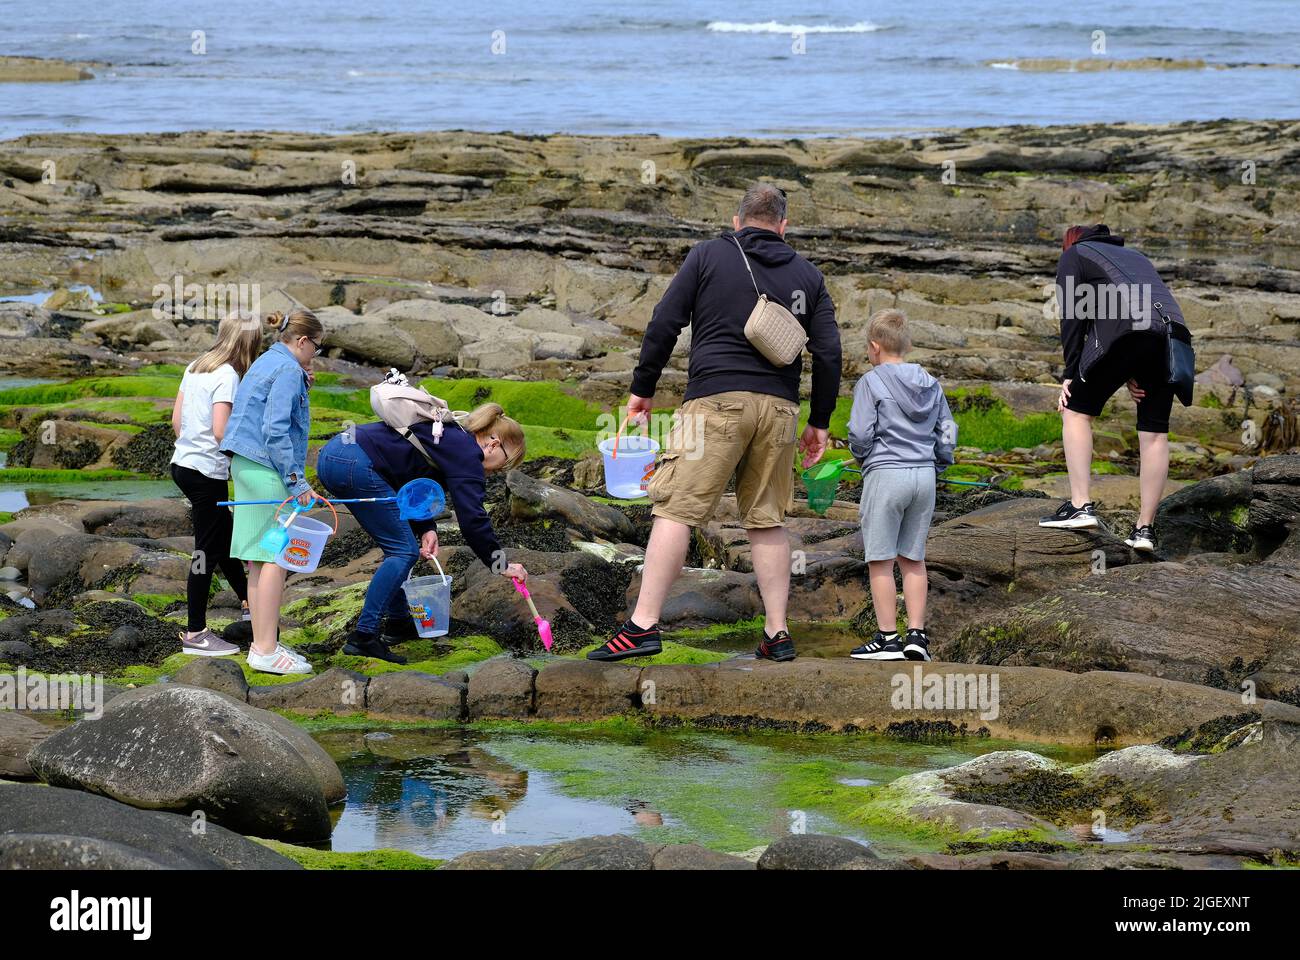 Family looking for creatures in rock pools on the north east coast of the UK. Stock Photo